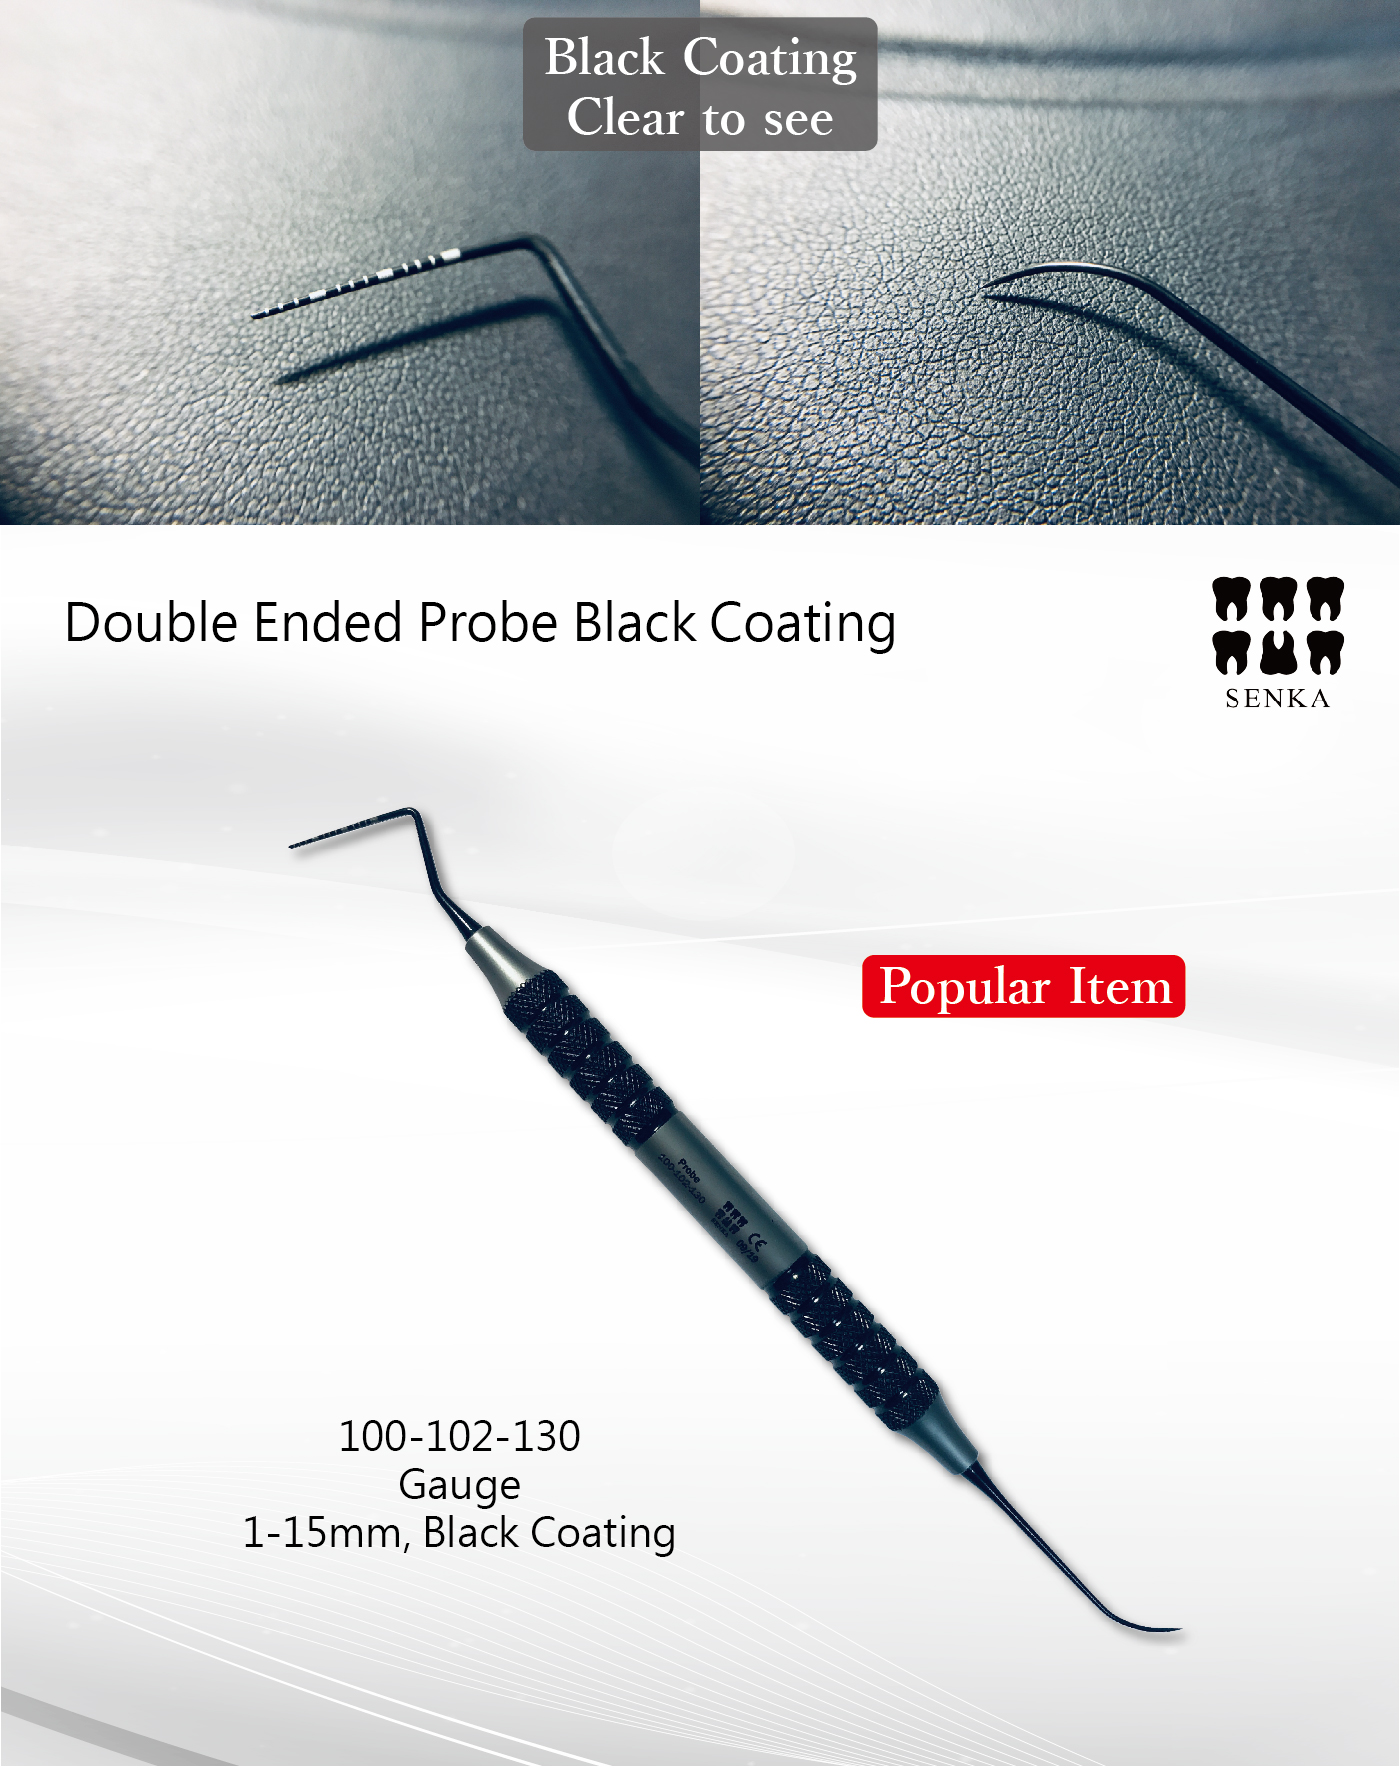 Double Sided Probes Black Coating content_工作區域 1.jpg